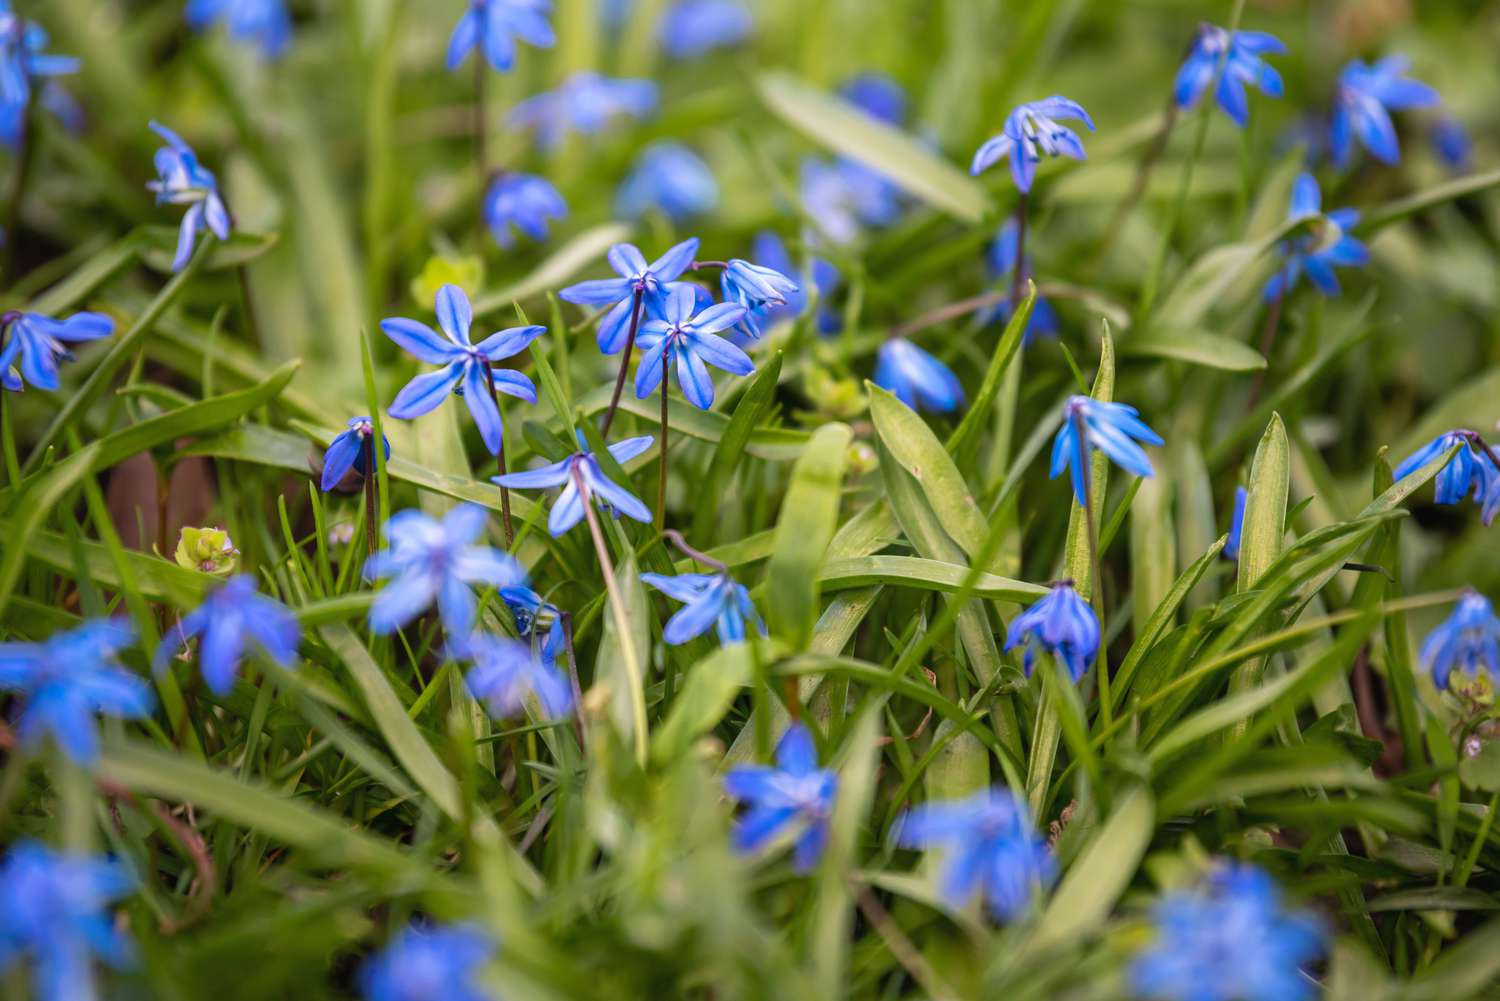 Siberian squill with small star-like blue and white flowers surrounded by grass